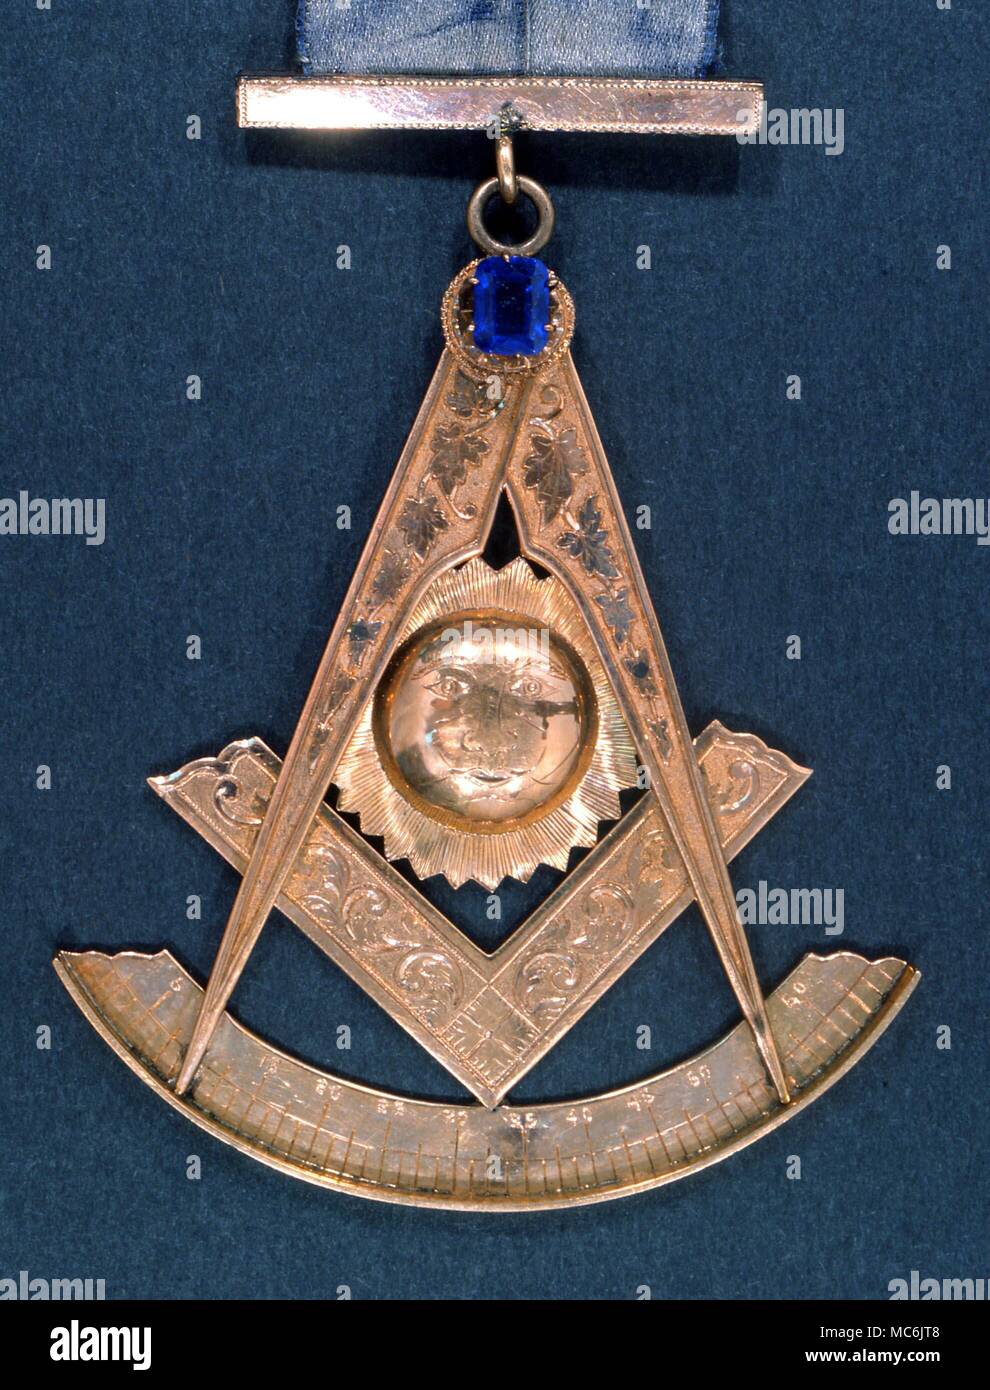 MASONIC JEWEL - compass, square, Sun and arch. Past Master's Jewel, from the colleciton of the Suprme Council (southern jurisdiction) Washington DC Stock Photo